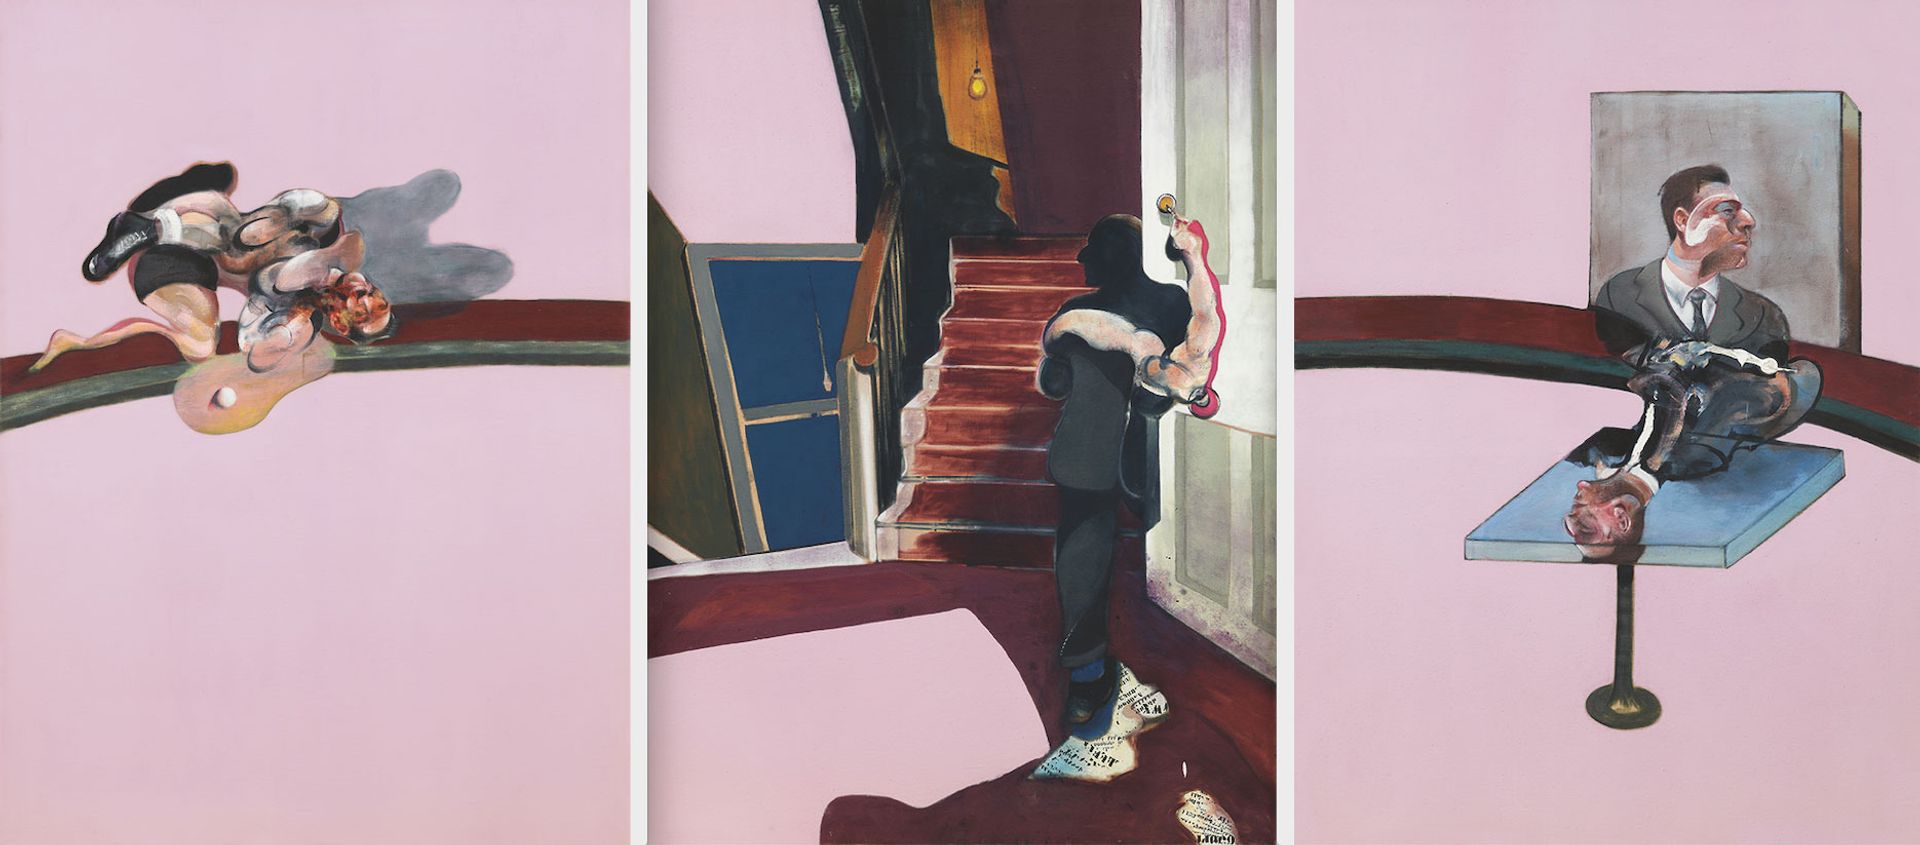 Francis Bacon’s In Memory of George  Dyer (1971) is one of 12 triptychs on show in Paris © The Estate of Francis Bacon. All rights reserved, DACS/Artimage 2018. Photo: Hugo Maertens